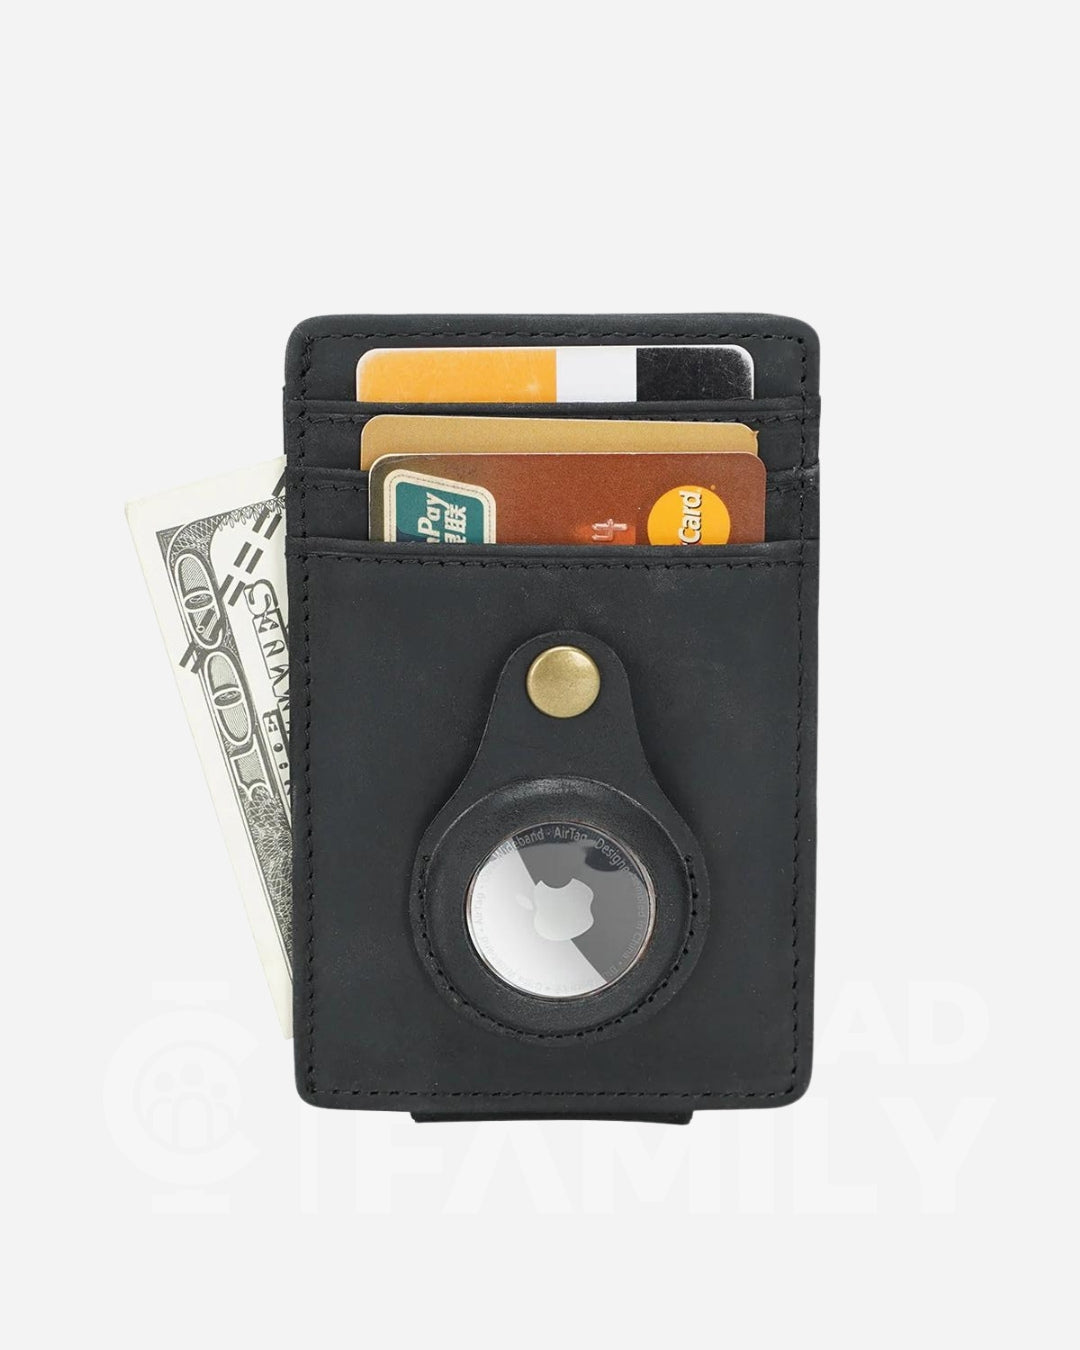 Black RFID blocking cowhide leather wallet with a built-in money clip